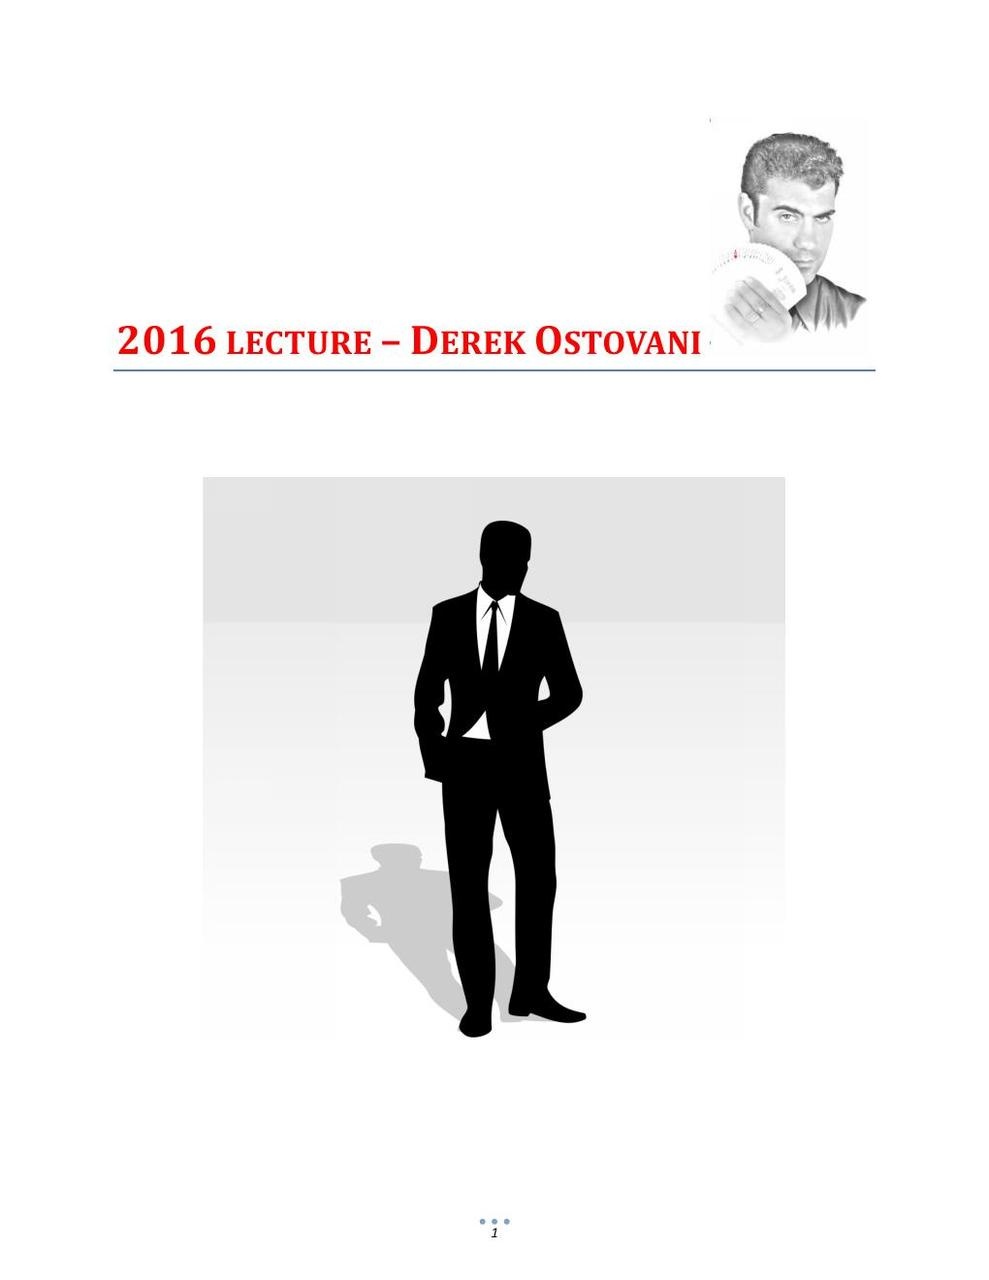 Lecture Notes by Derek Ostovani (Instant Download)